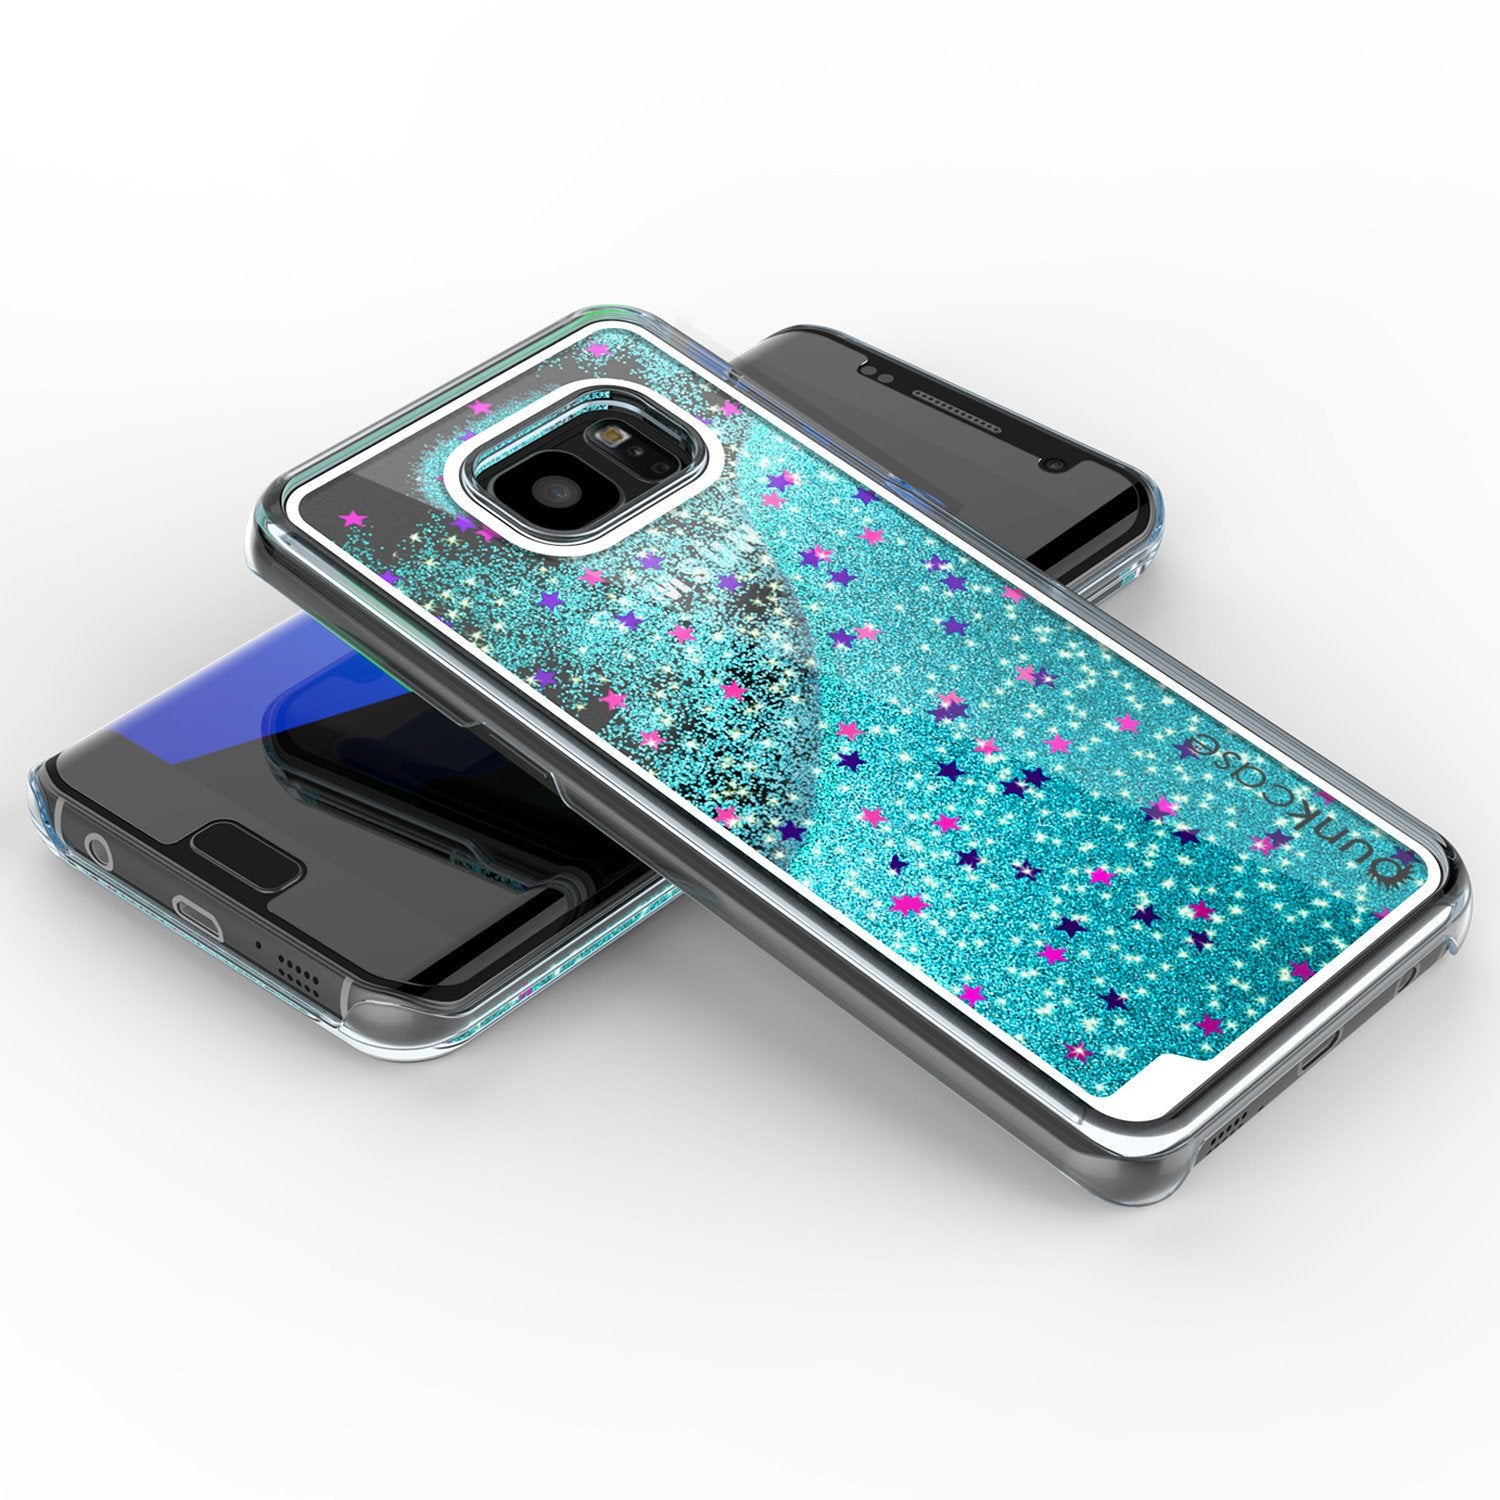 S7 Edge Case, Punkcase [Liquid Teal Series] Protective Dual Layer Floating Glitter Cover with lots of Bling & Sparkle + PunkShield Screen Protector